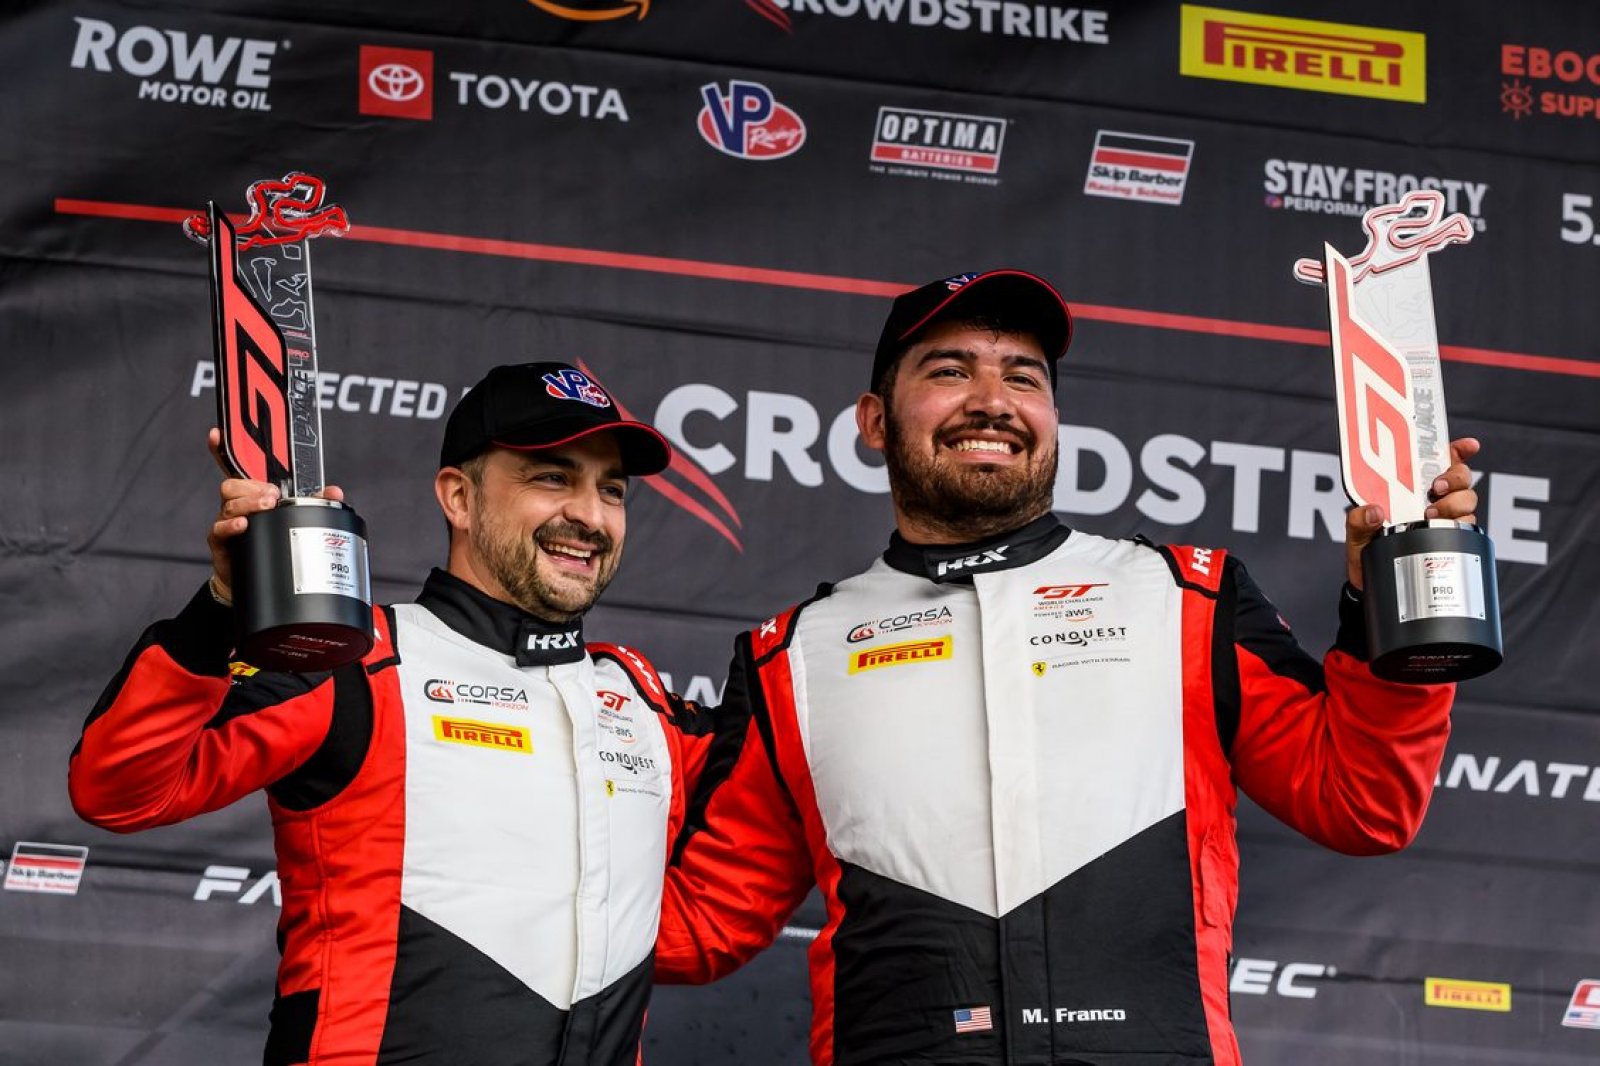 FIRST PODIUM FOR THE FERRARI 296 GT3 WITH BALZAN AND FRANCO AT SONOMA RACEWAY